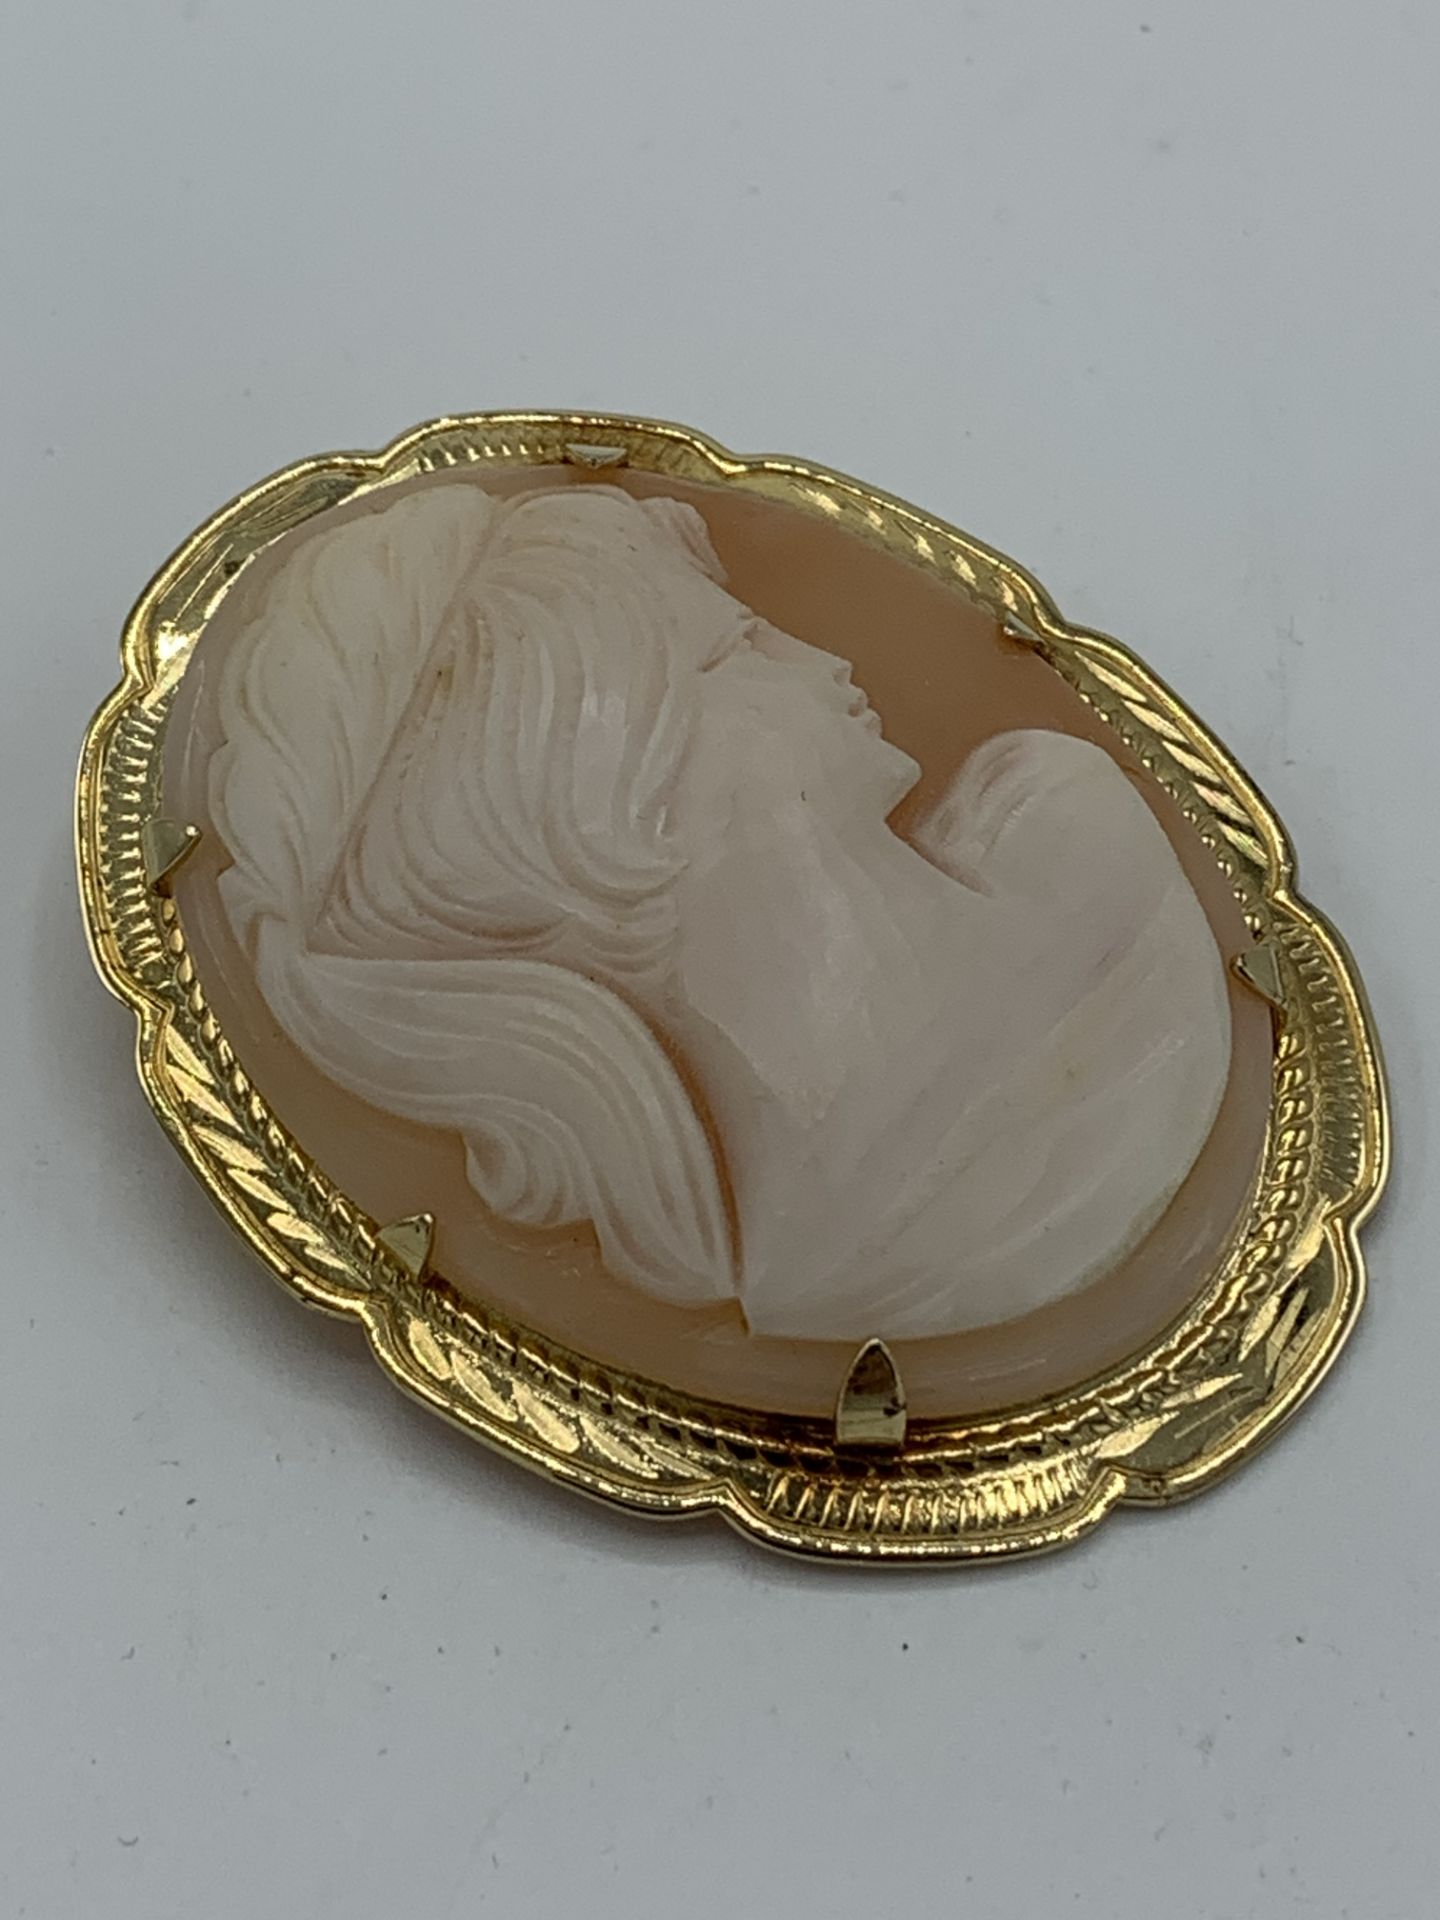 Large cameo brooch, diameter 6 x 4.5cms. - Image 2 of 2